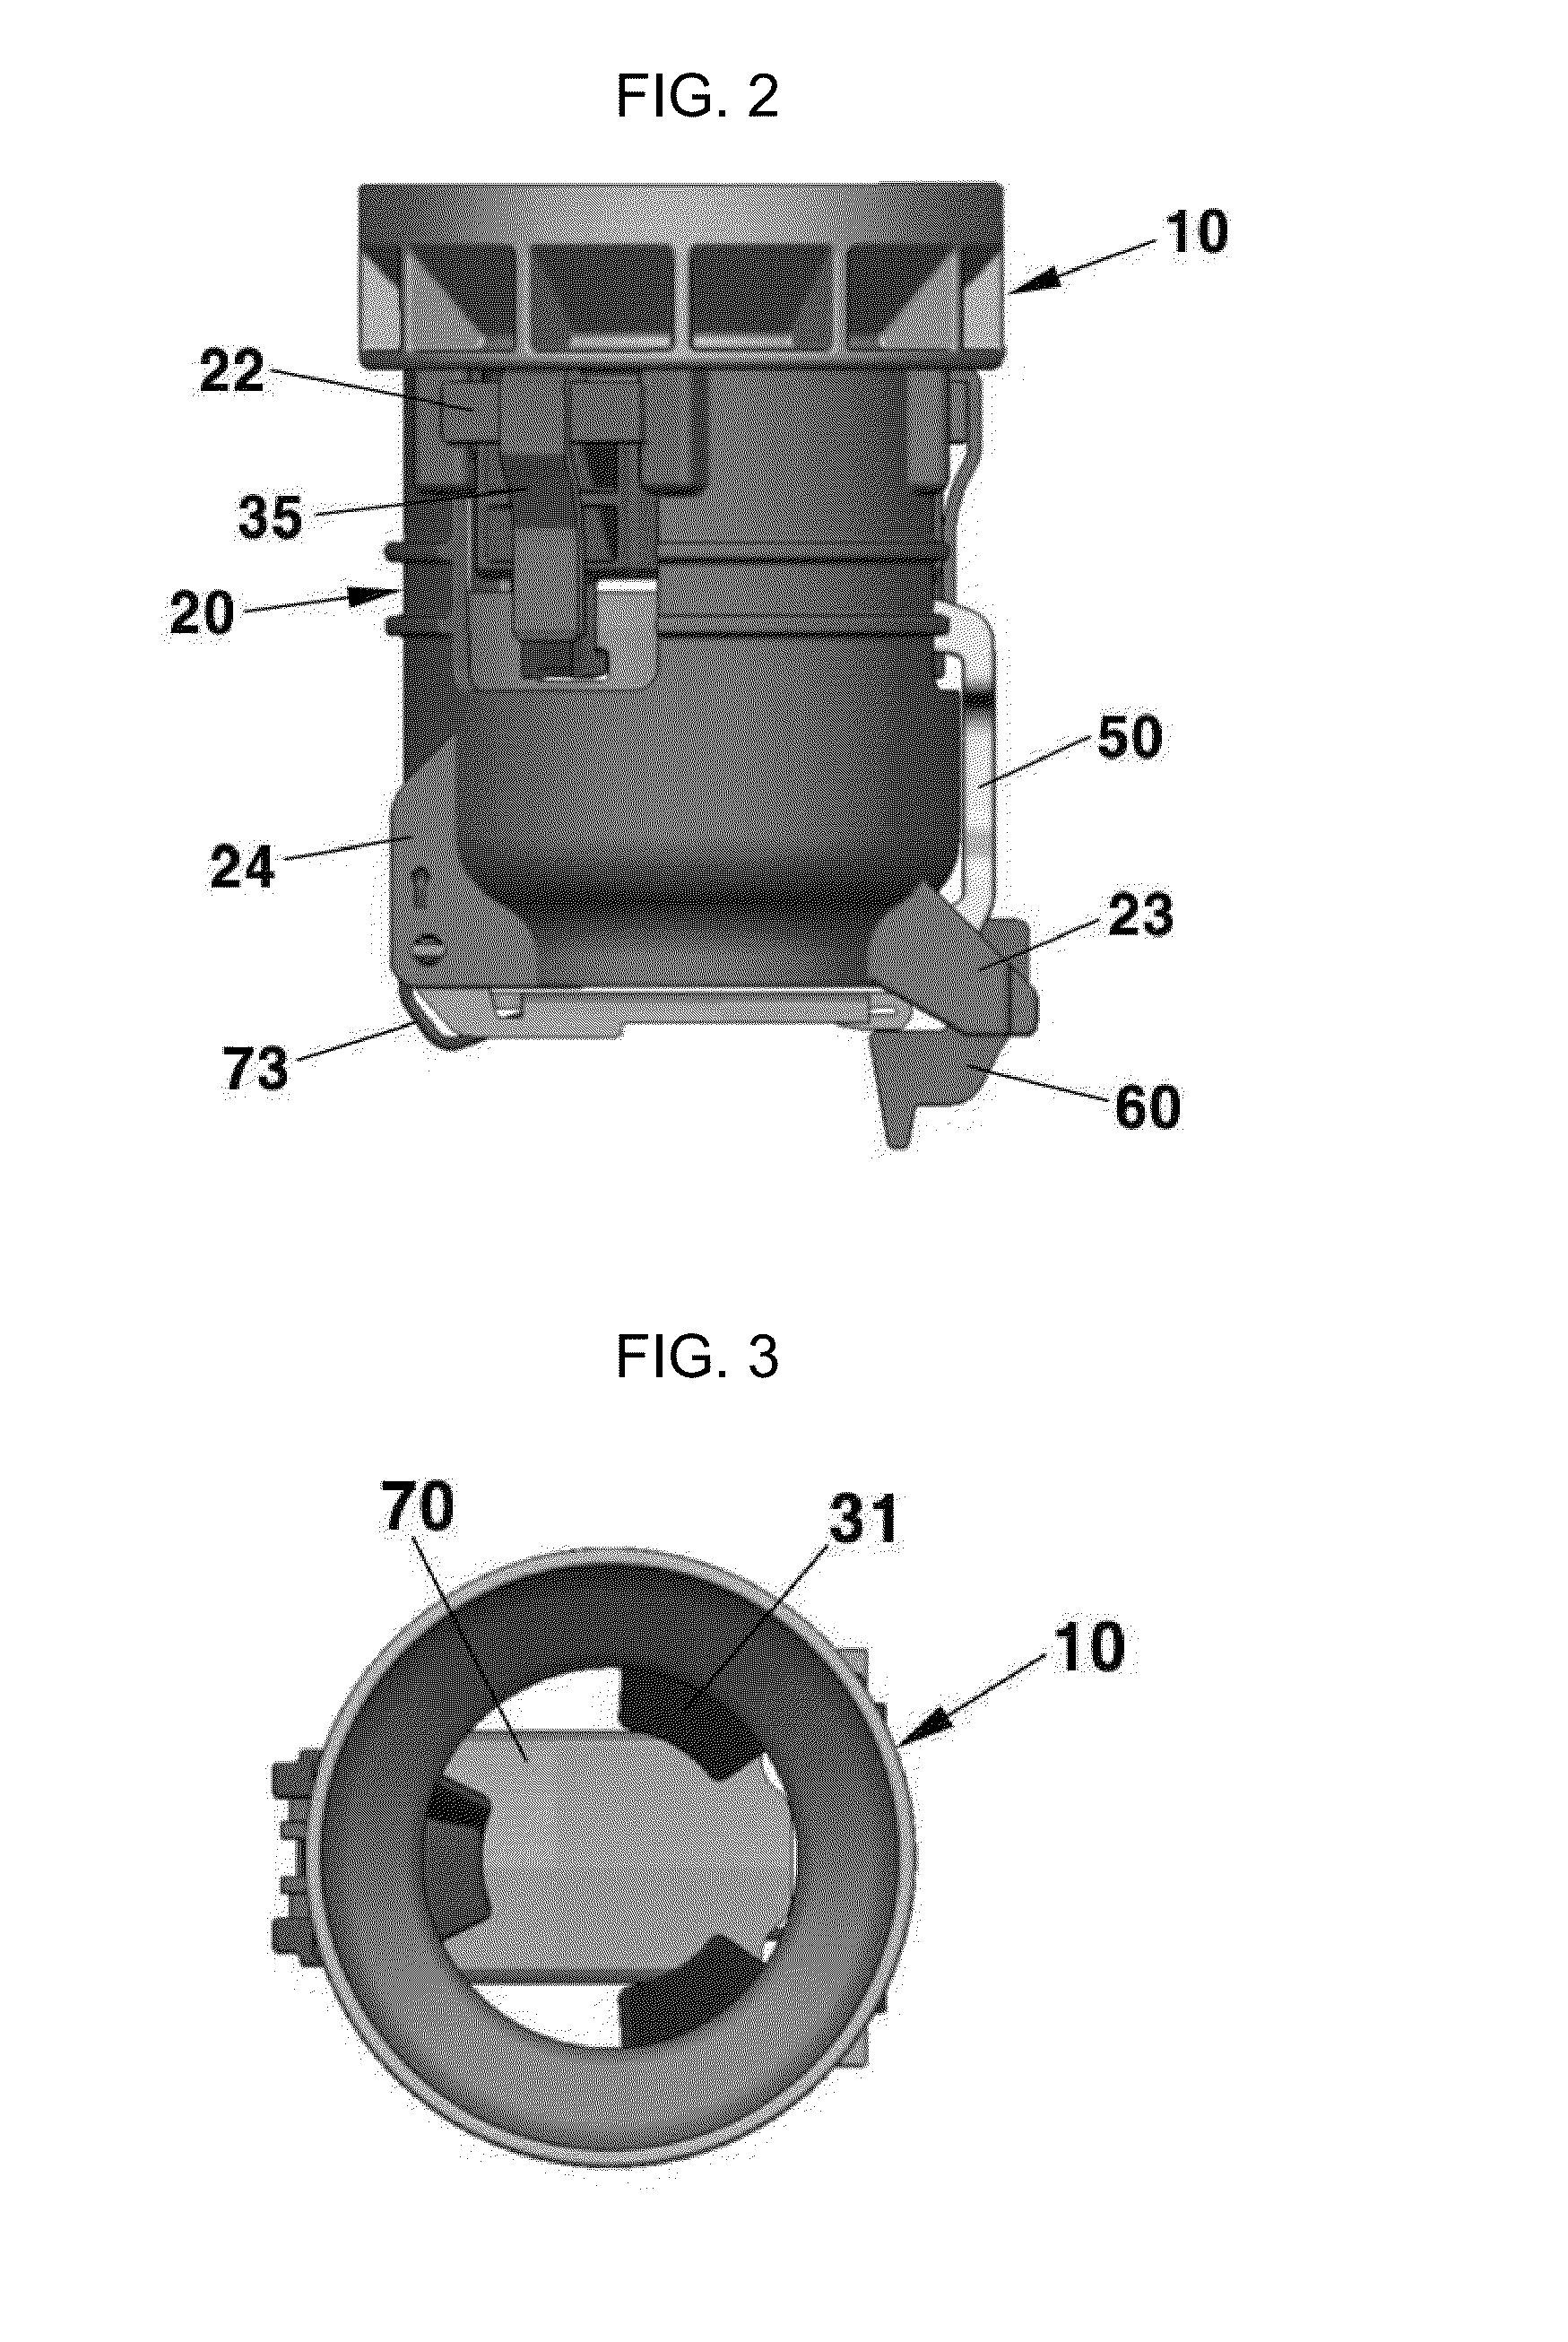 Filler neck apparatus for preventing fuel from mixing